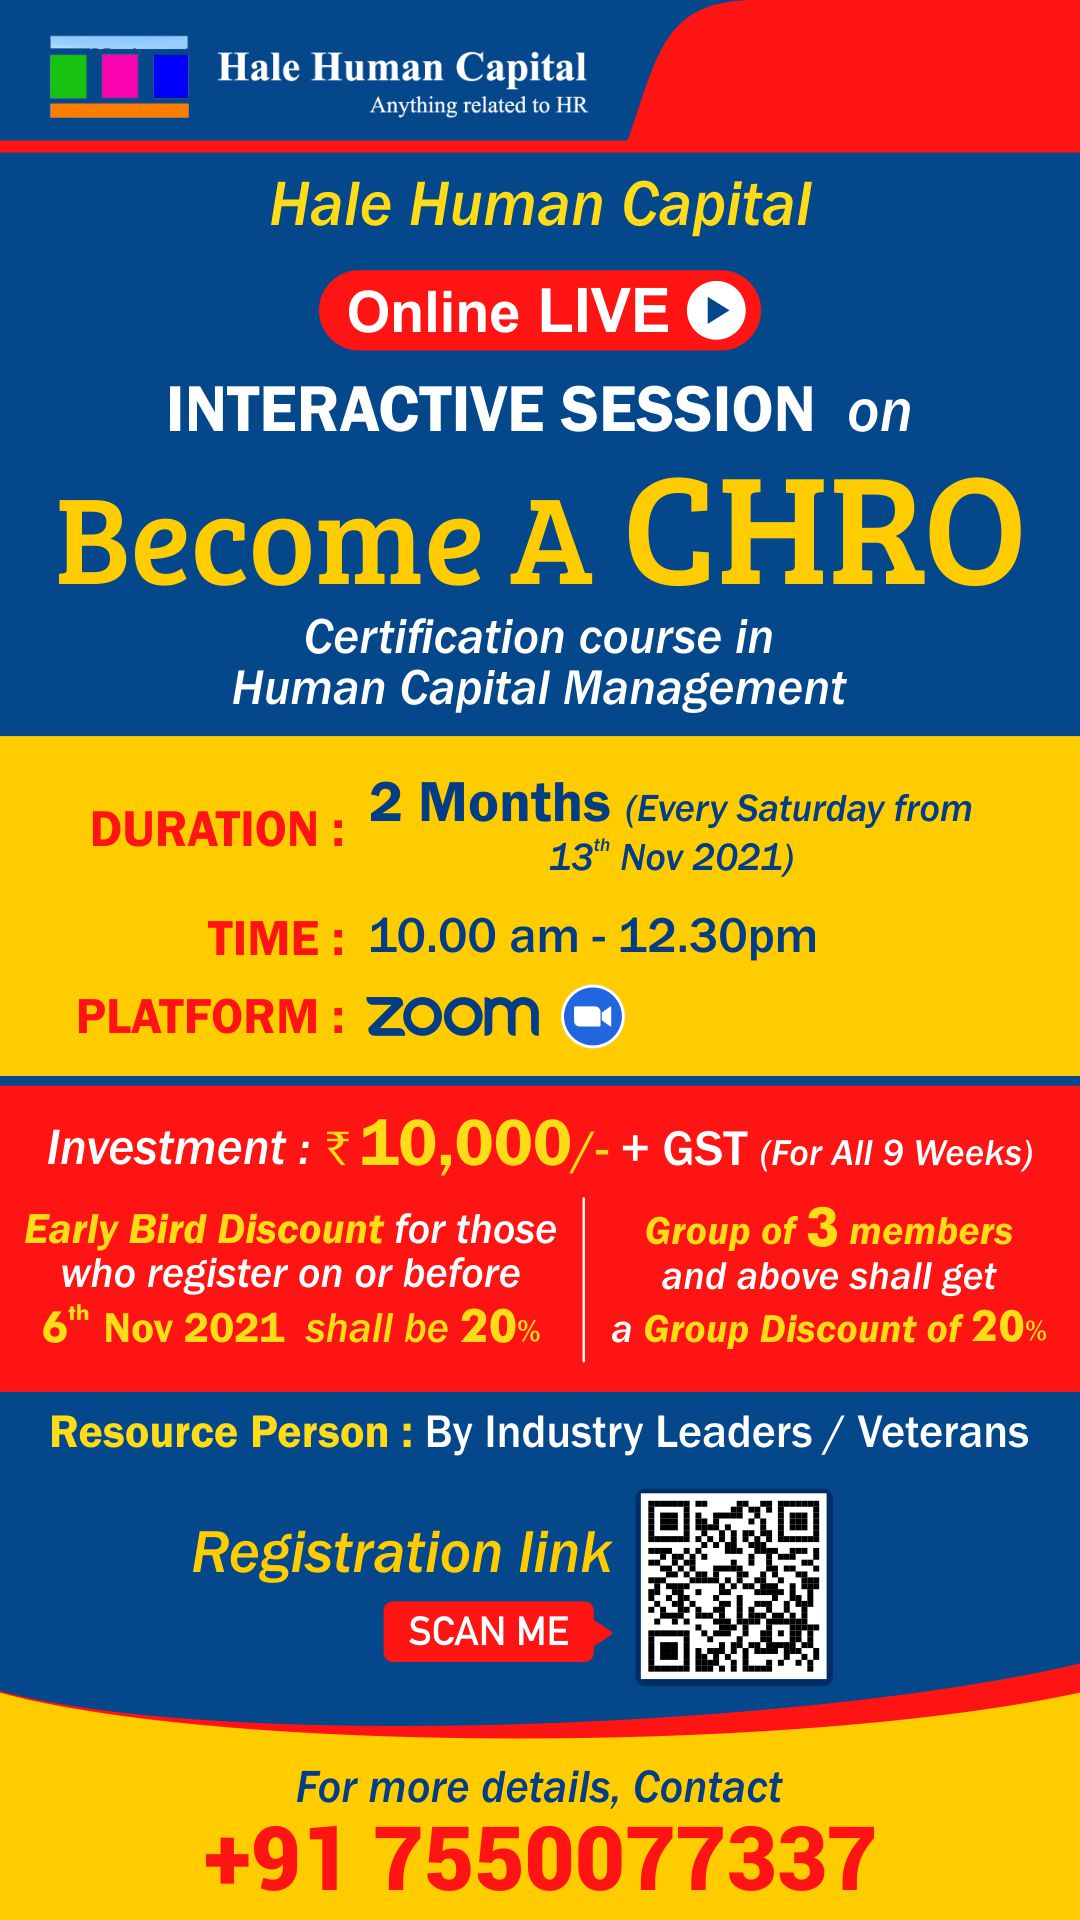 To Become A CHRO - An Online Certificate Course In HCM